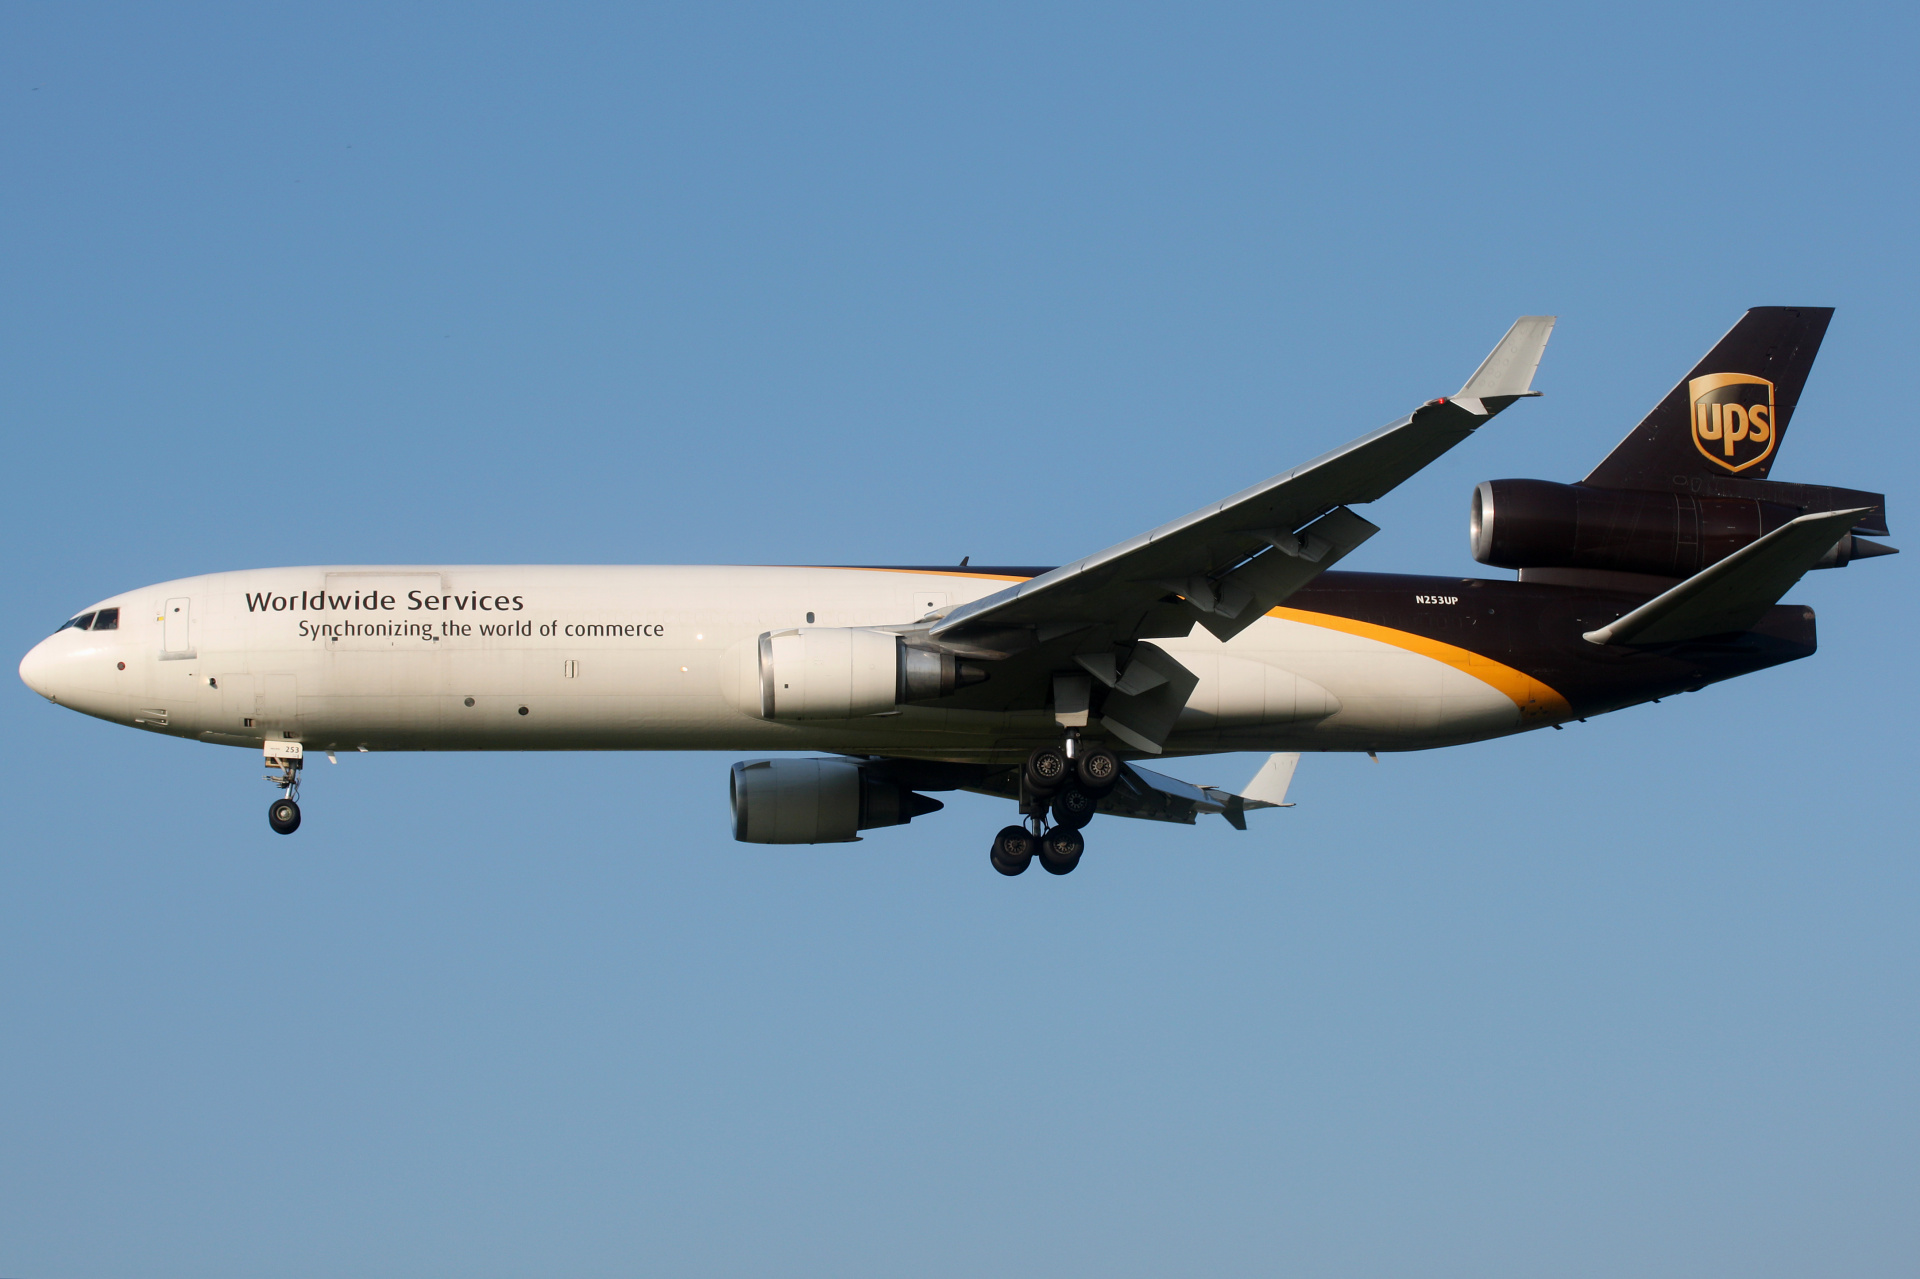 N253UP, United Parcel Service (UPS) Airlines (Aircraft » EPWA Spotting » McDonnell Douglas MD-11F)